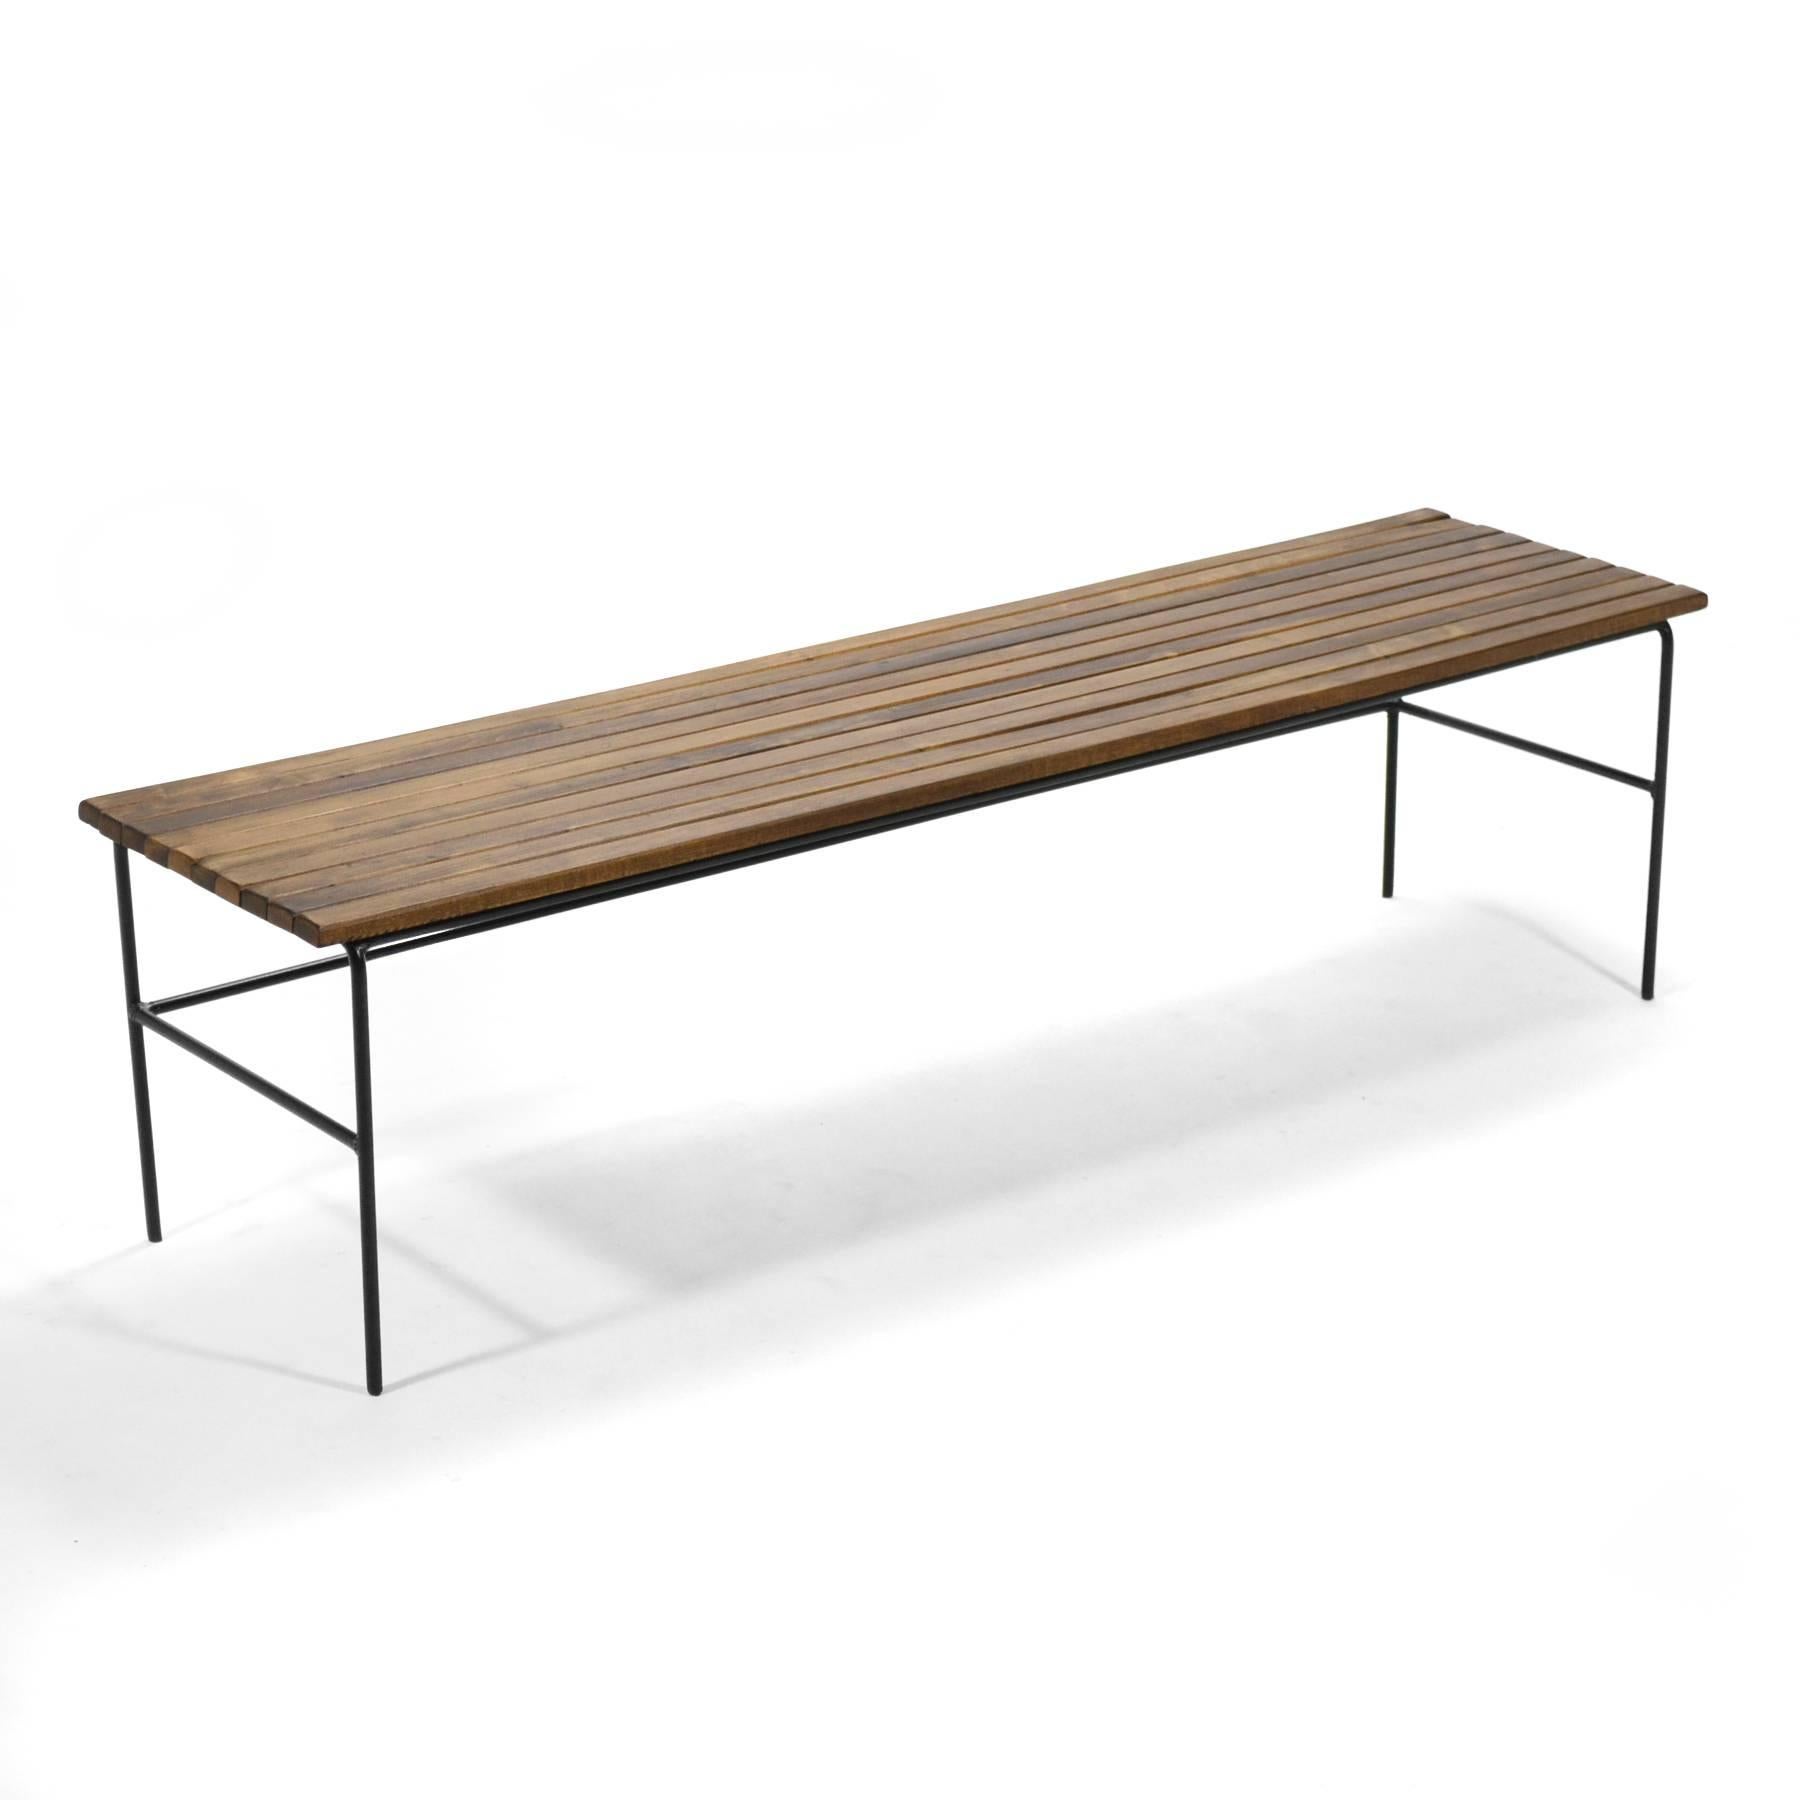 The slat bench was a very popular form in Mid-Century America. Highly functional, it can serve as a seat or a table. This design by Arthur Umanoff has a top of wooden slats supported by a simple iron base. The piece has a strong graphic quality with